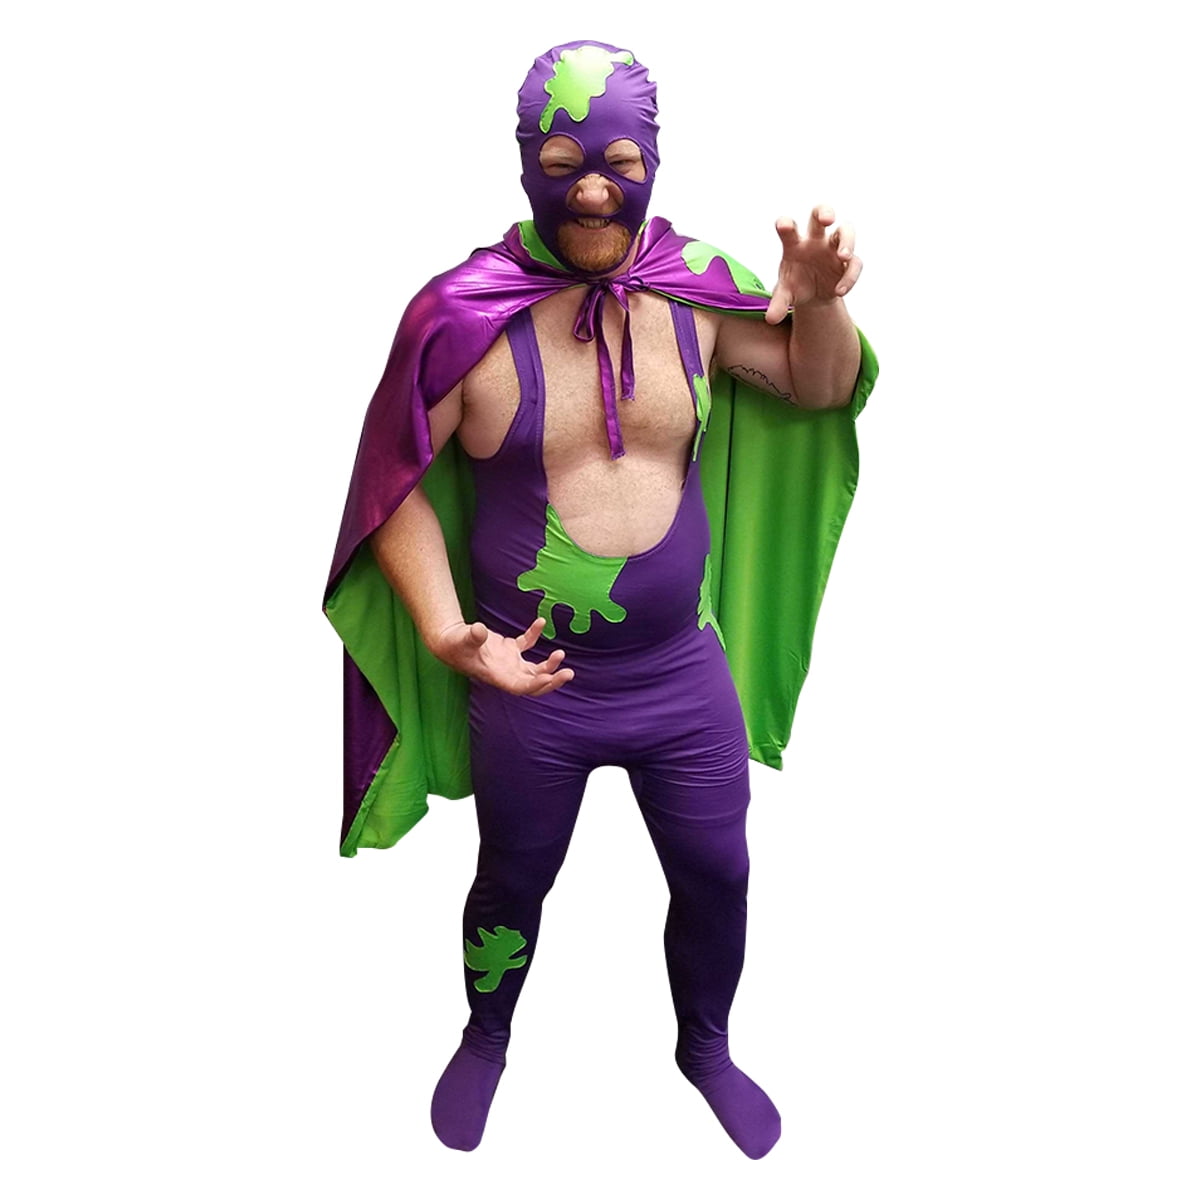 The Revolting Blob Costume Billy Madison Principal Anderson Wrestler Singlet Pro Wrestling Max Purple 90s Movie Halloween Body Suit Gift